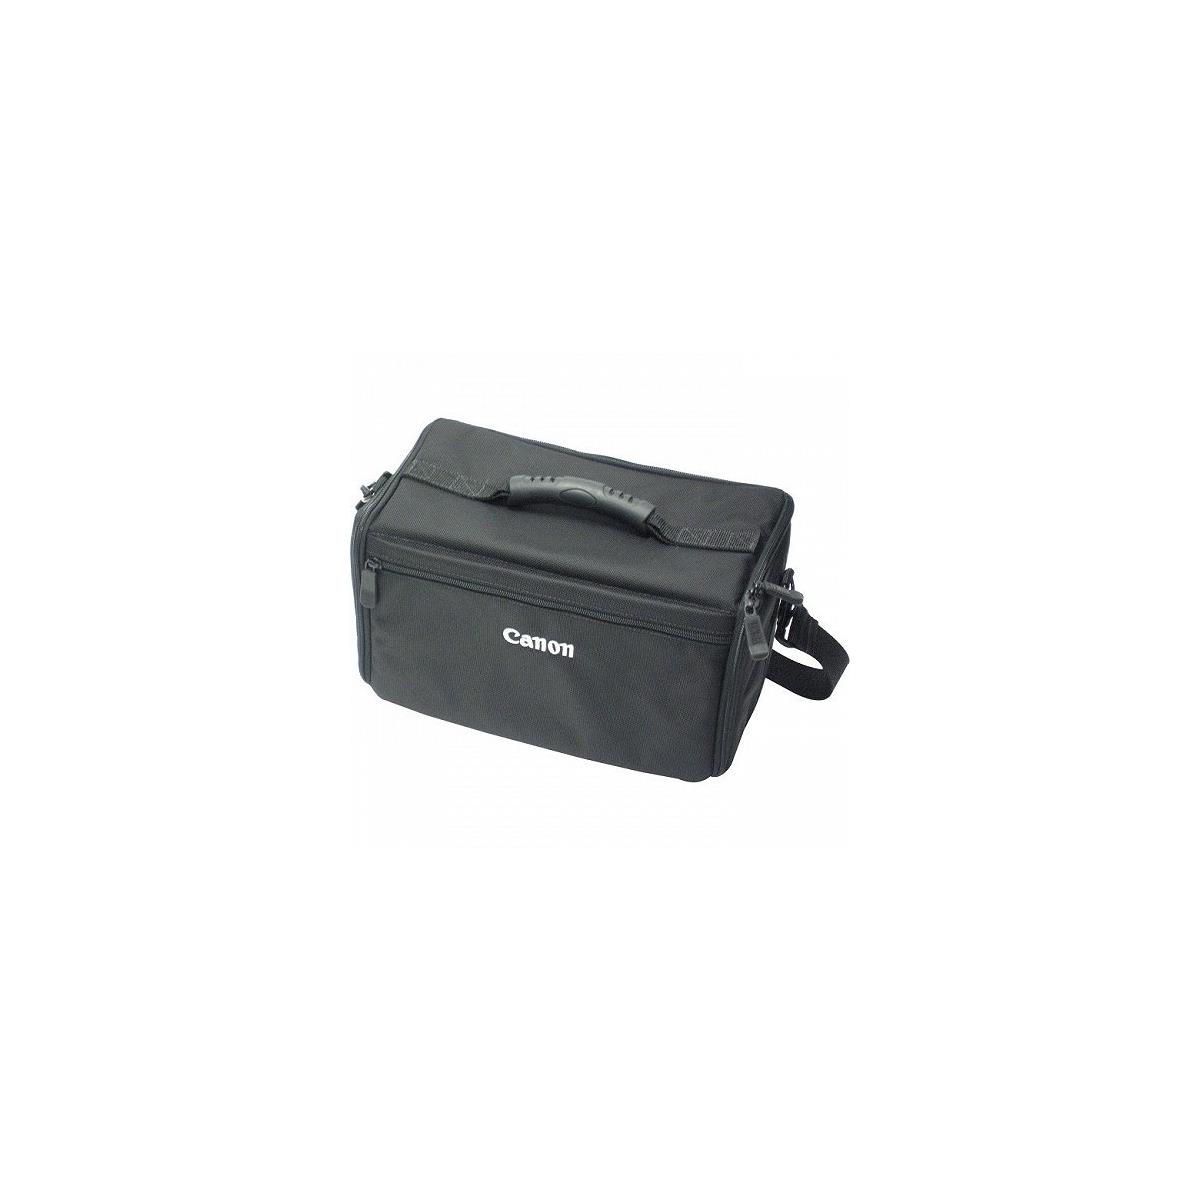 Image of Canon Soft Carrying Case for imageFORMULA DR-2010C and DR-2510C Scanner